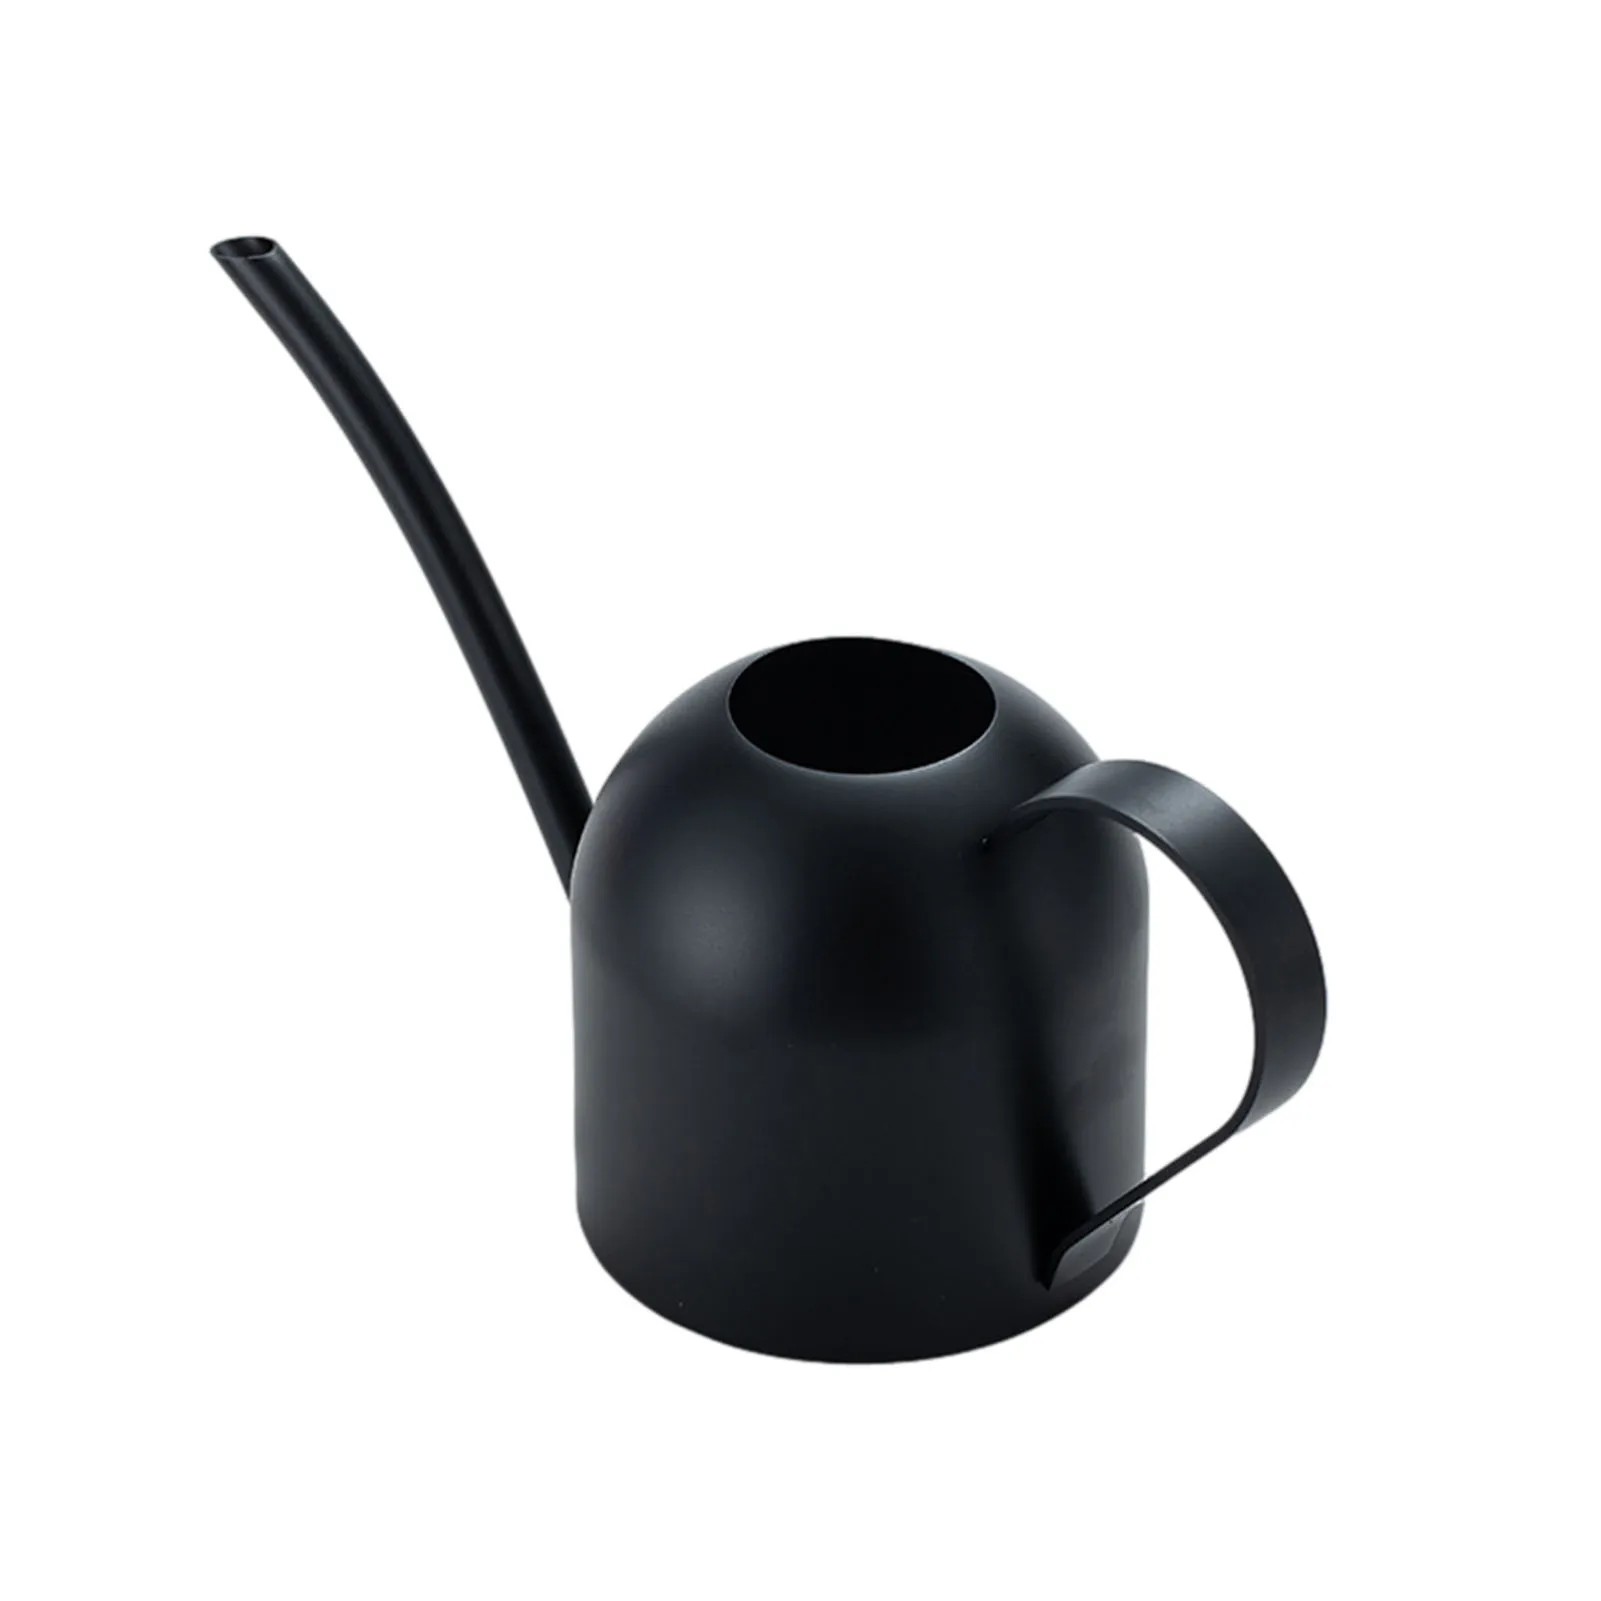 

Mini Black Stainless Steel Watering Can Retro Metal Watering Pot Plant Waterer With Long Spout 500ml Gardening Tools